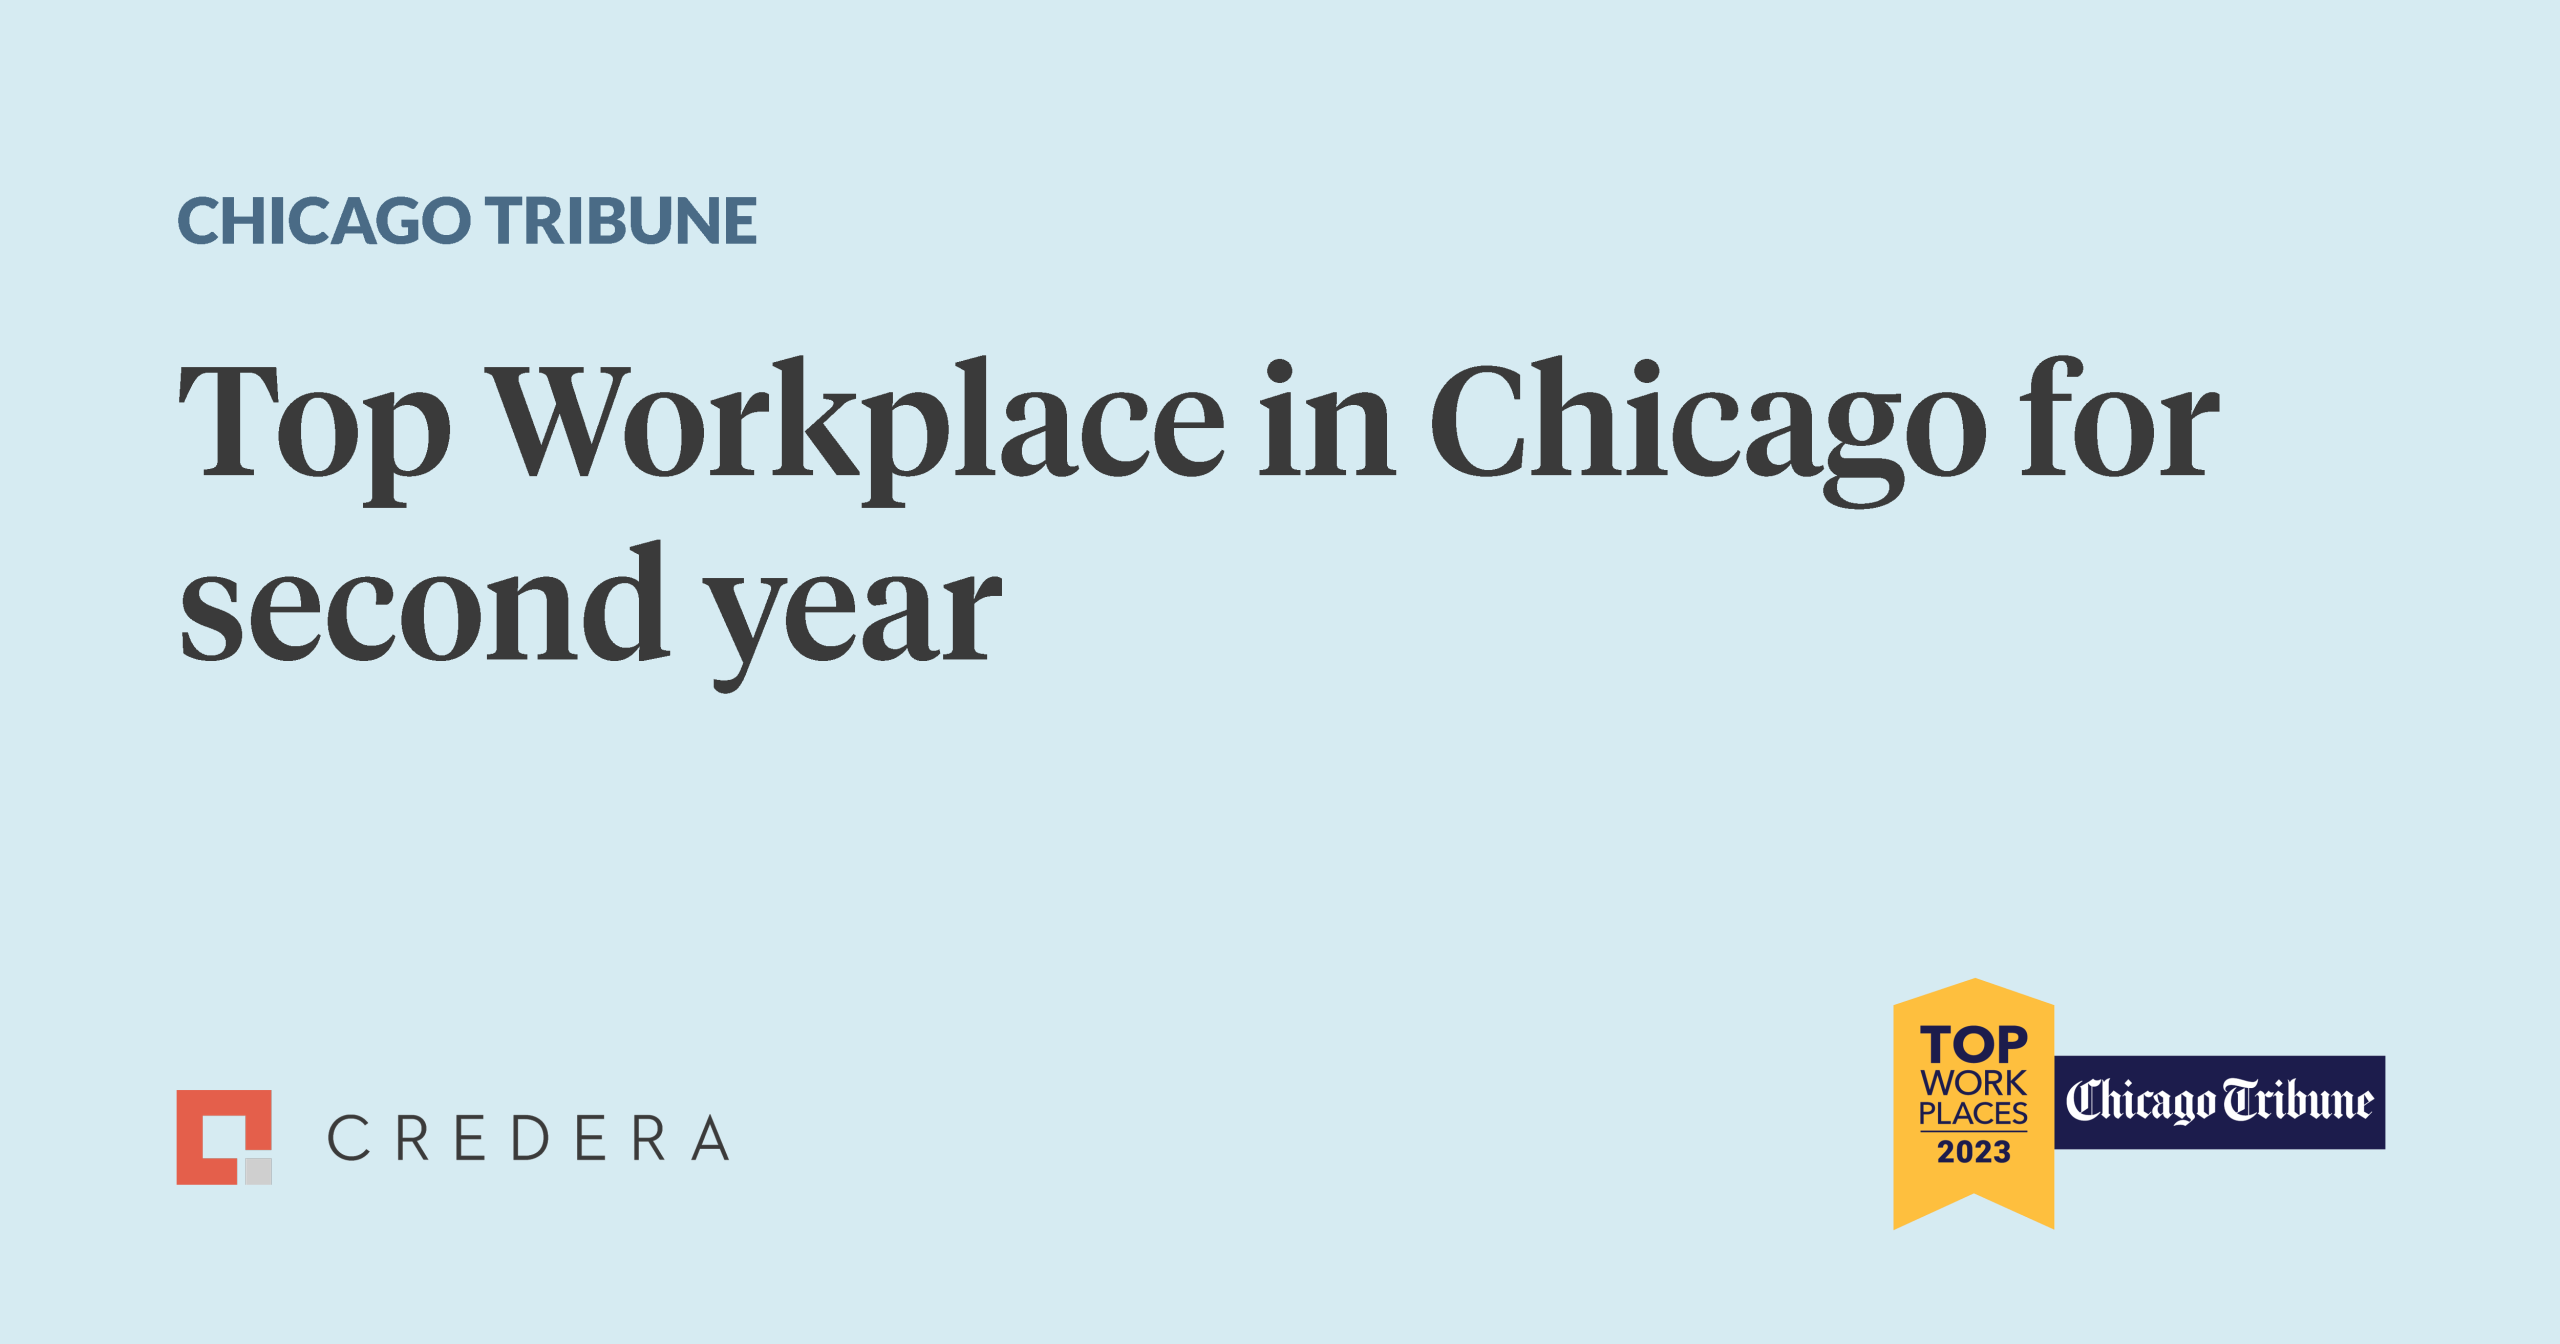 Credera named a Top Workplace in Chicago for its second year